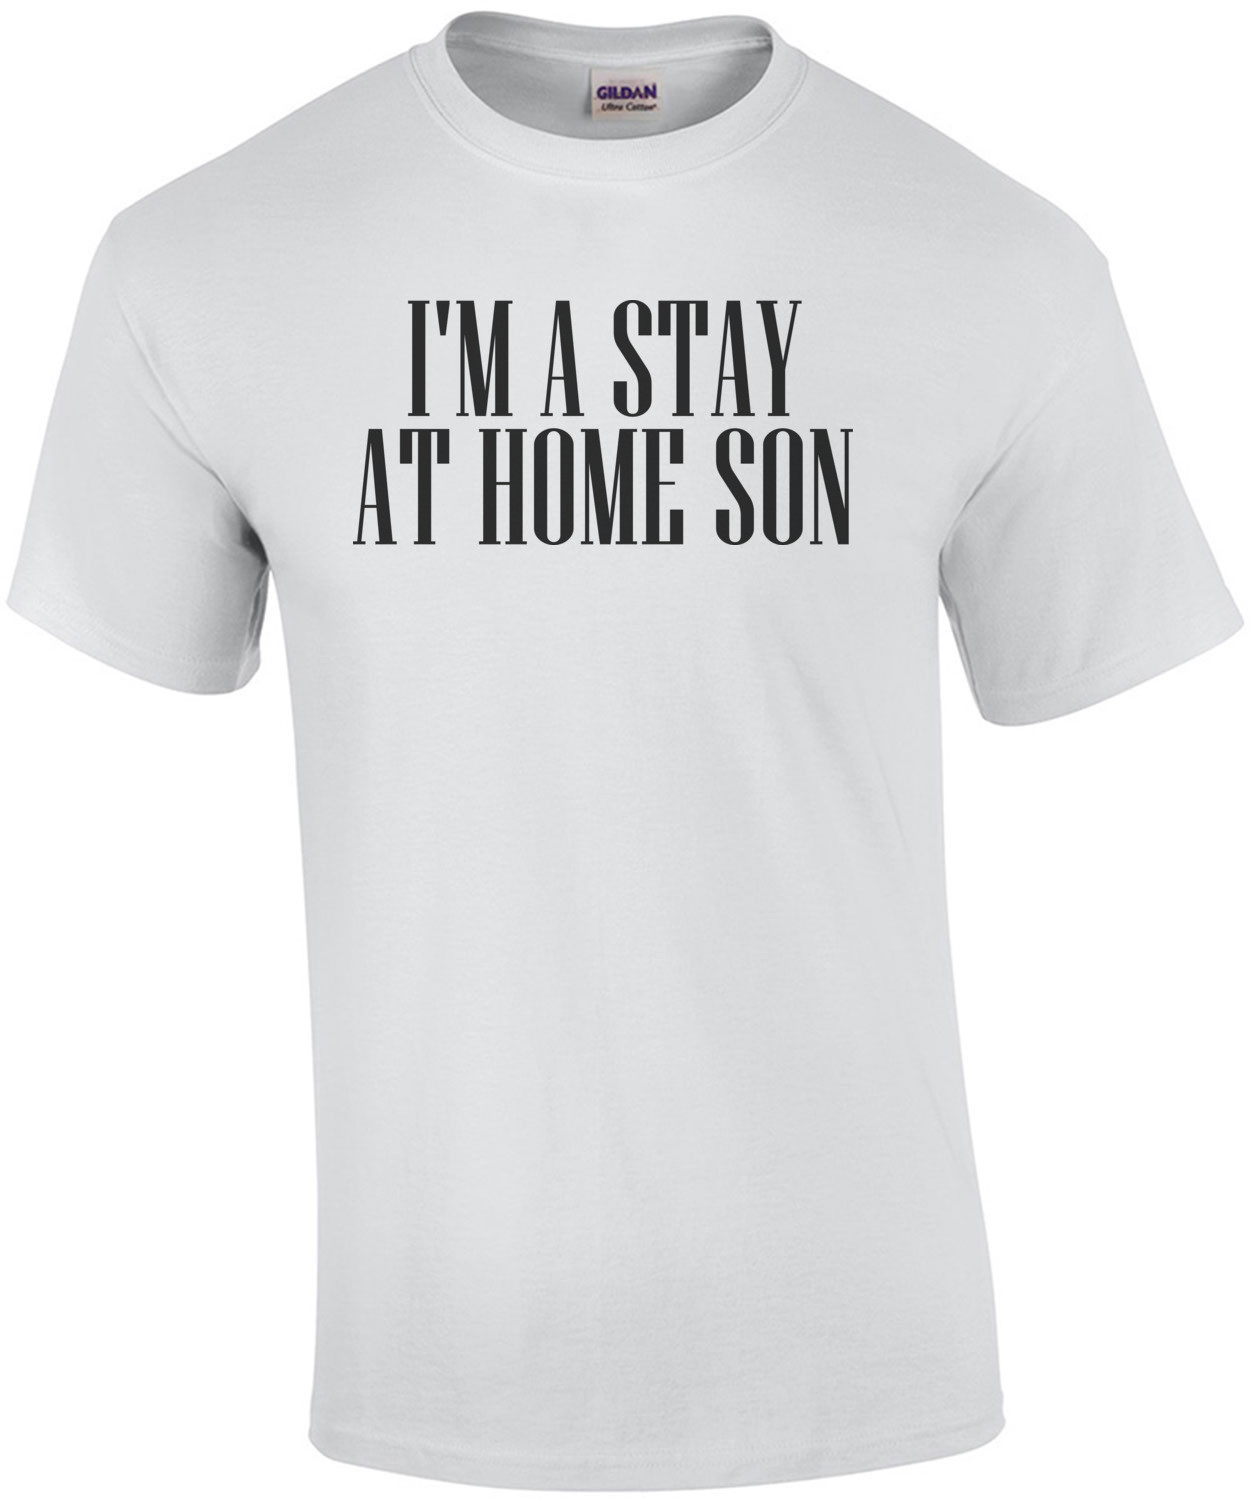 I'm A Stay At Home Son